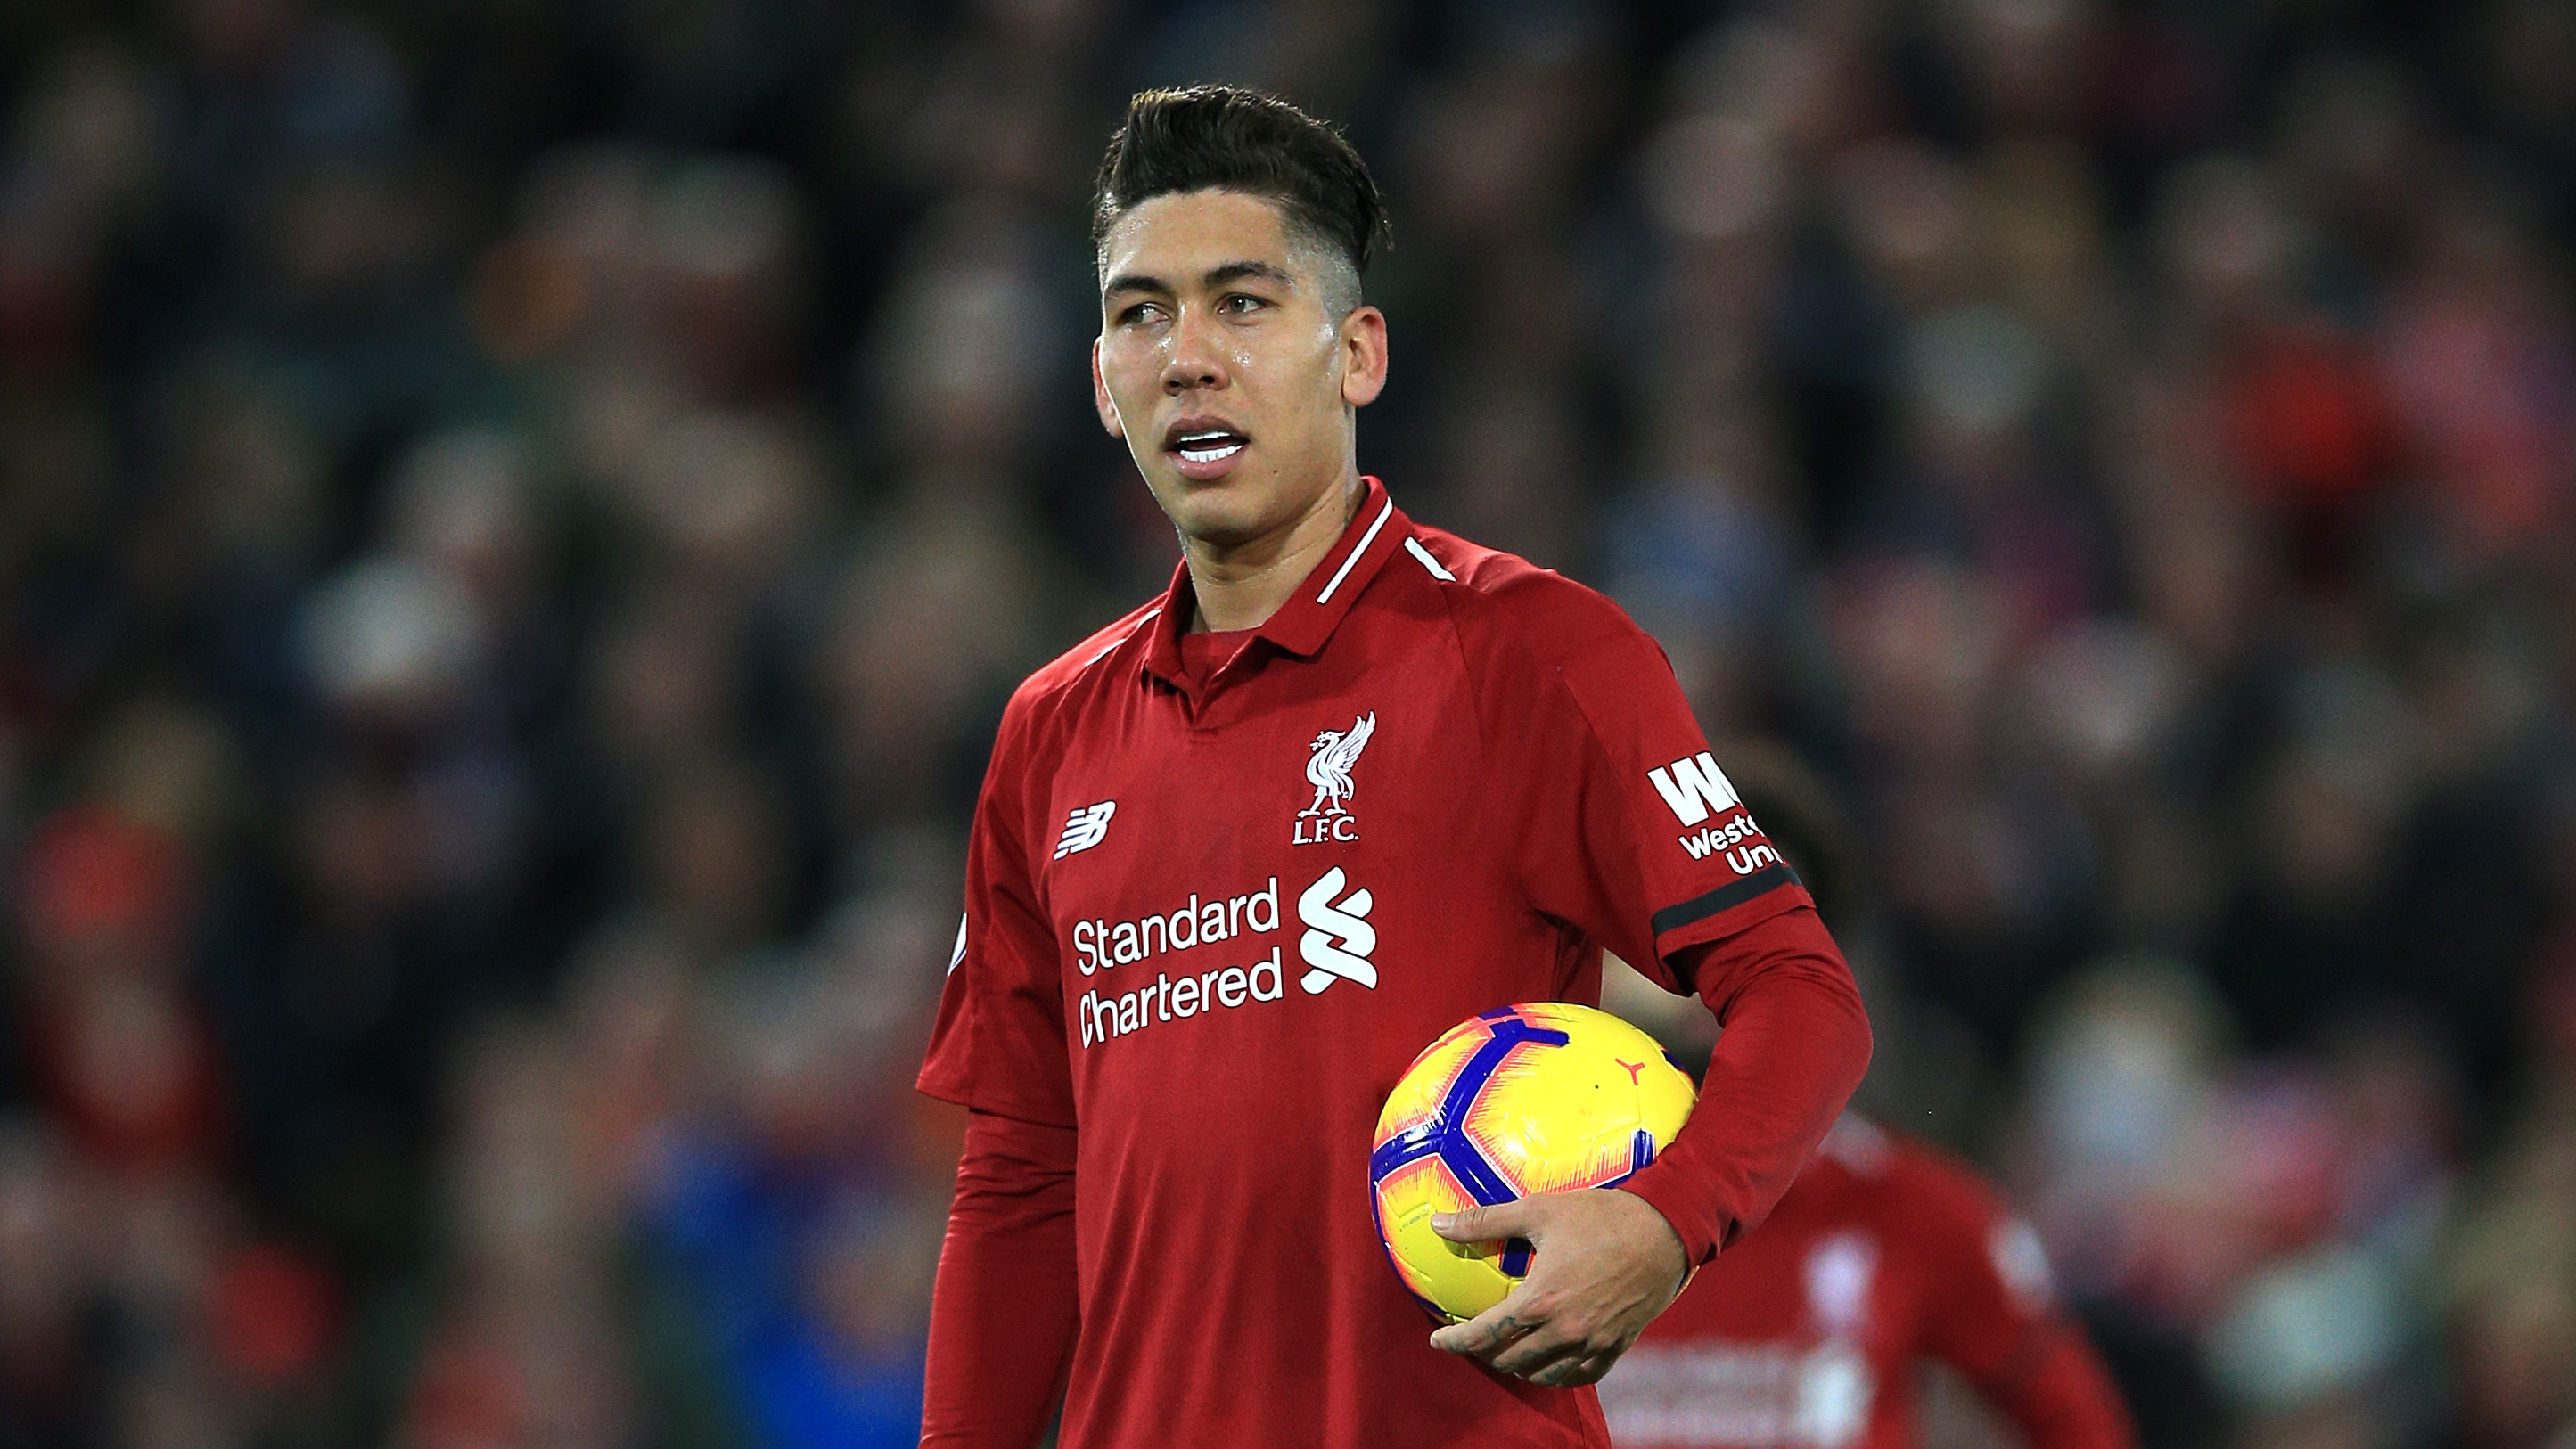 Photo – Roberto Firmino at his outrageous best before Liverpool’s first goal against Watford